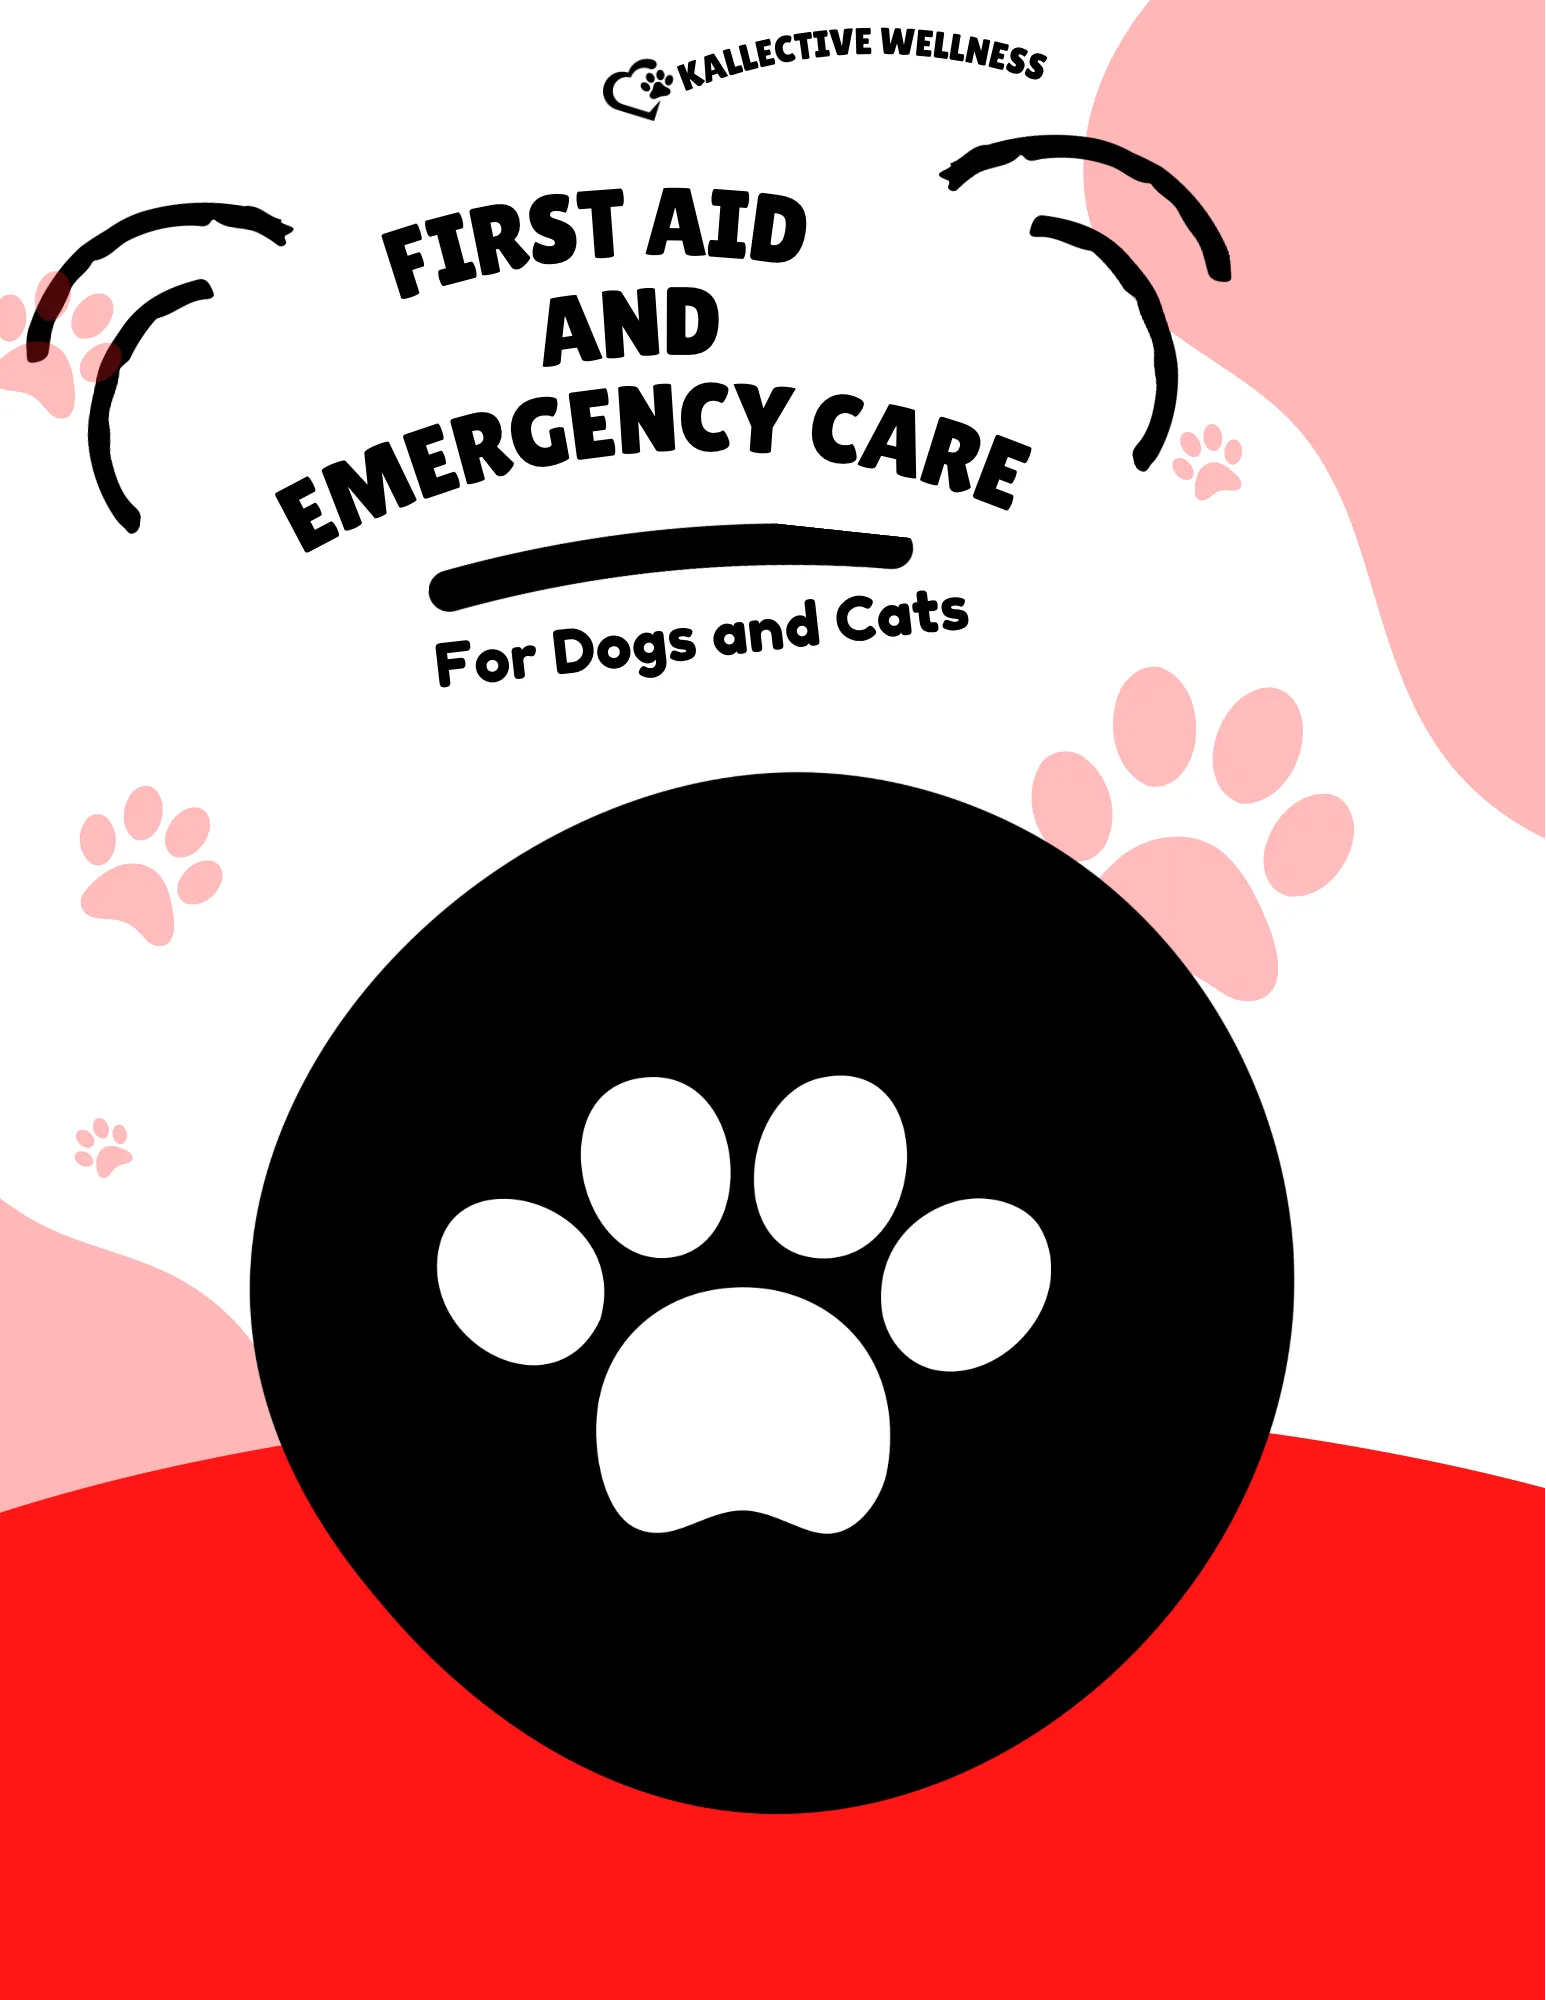 First Aid and Emergency Care guide for dogs and cats